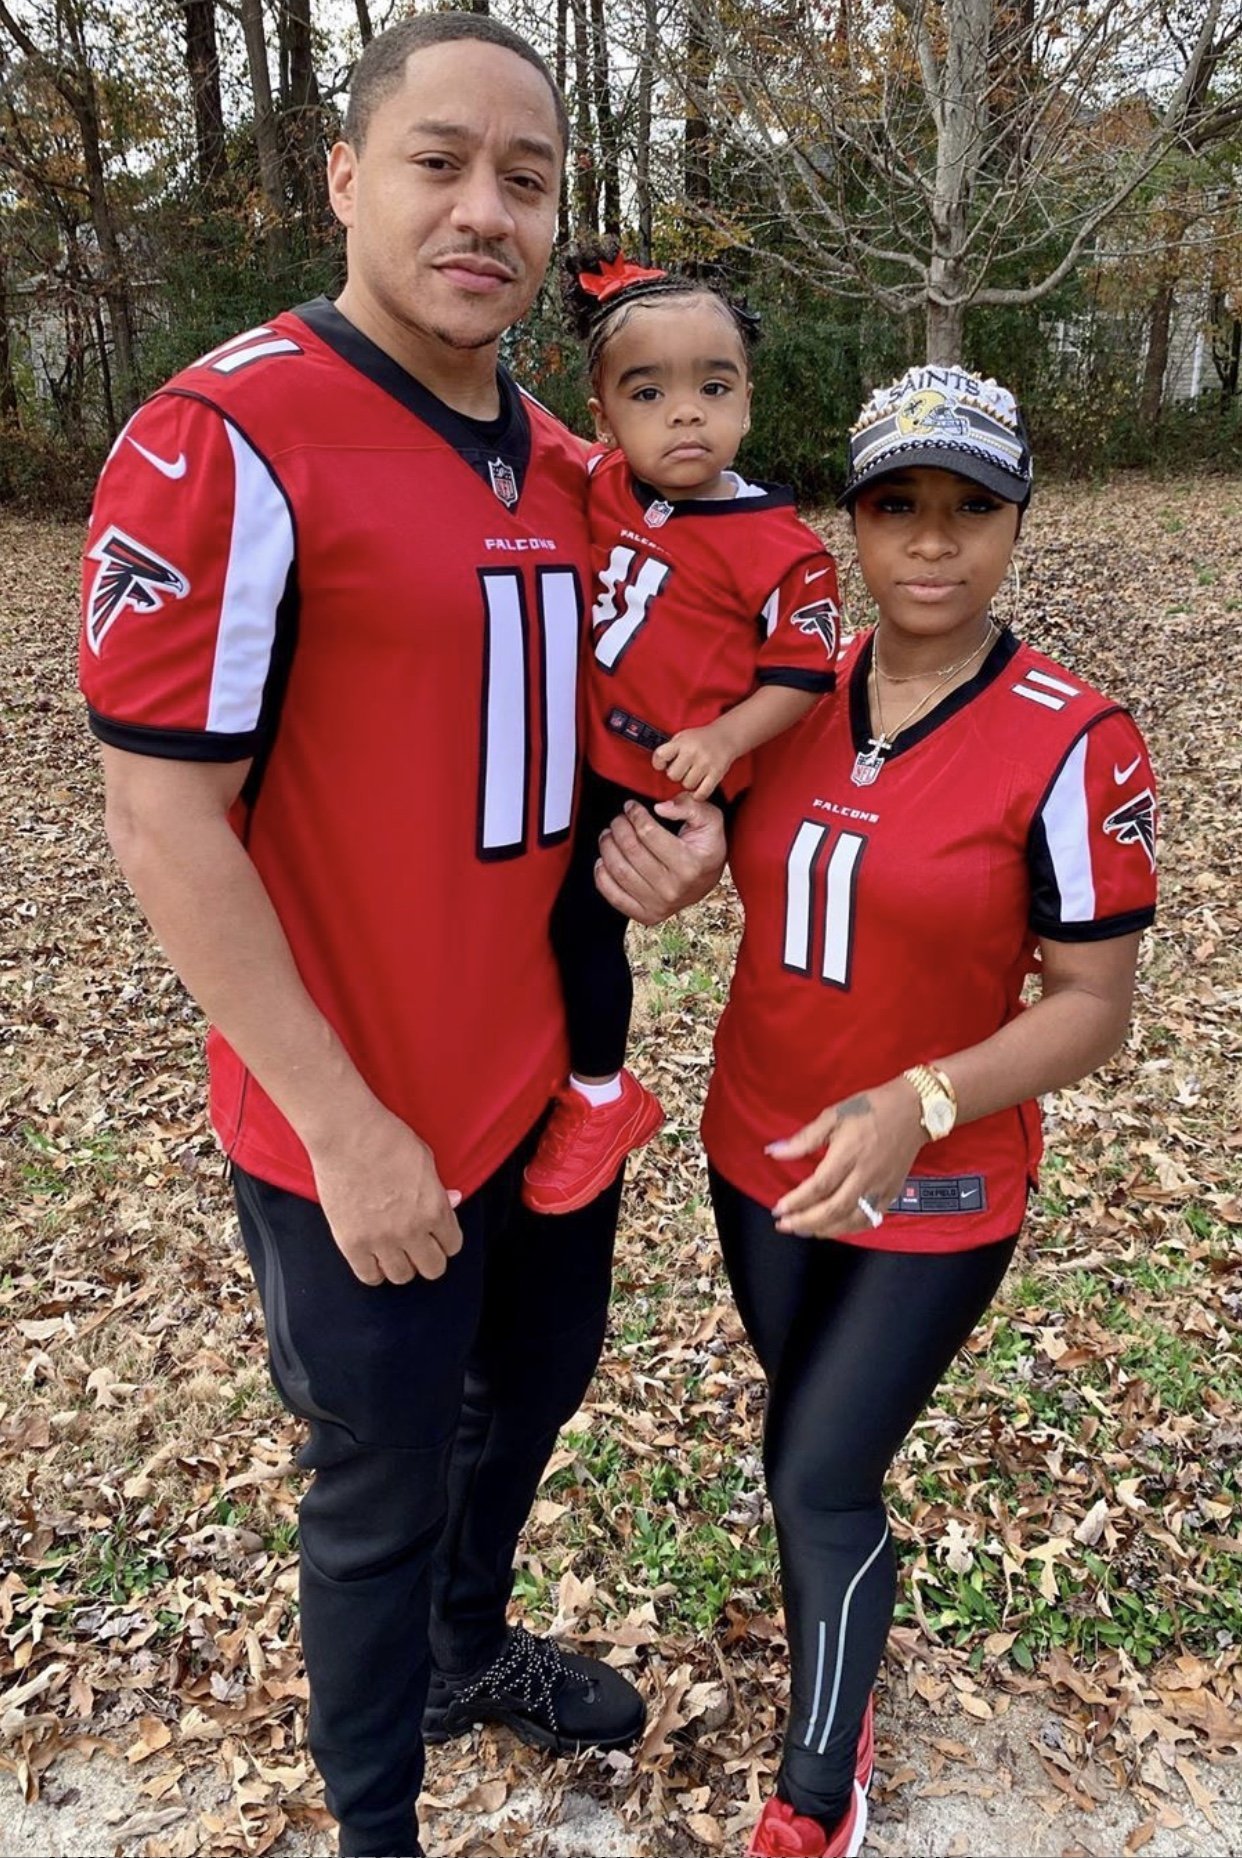 The Johnson-Rushing family in matching attires | Source: Instagra,/ToyaJohnson